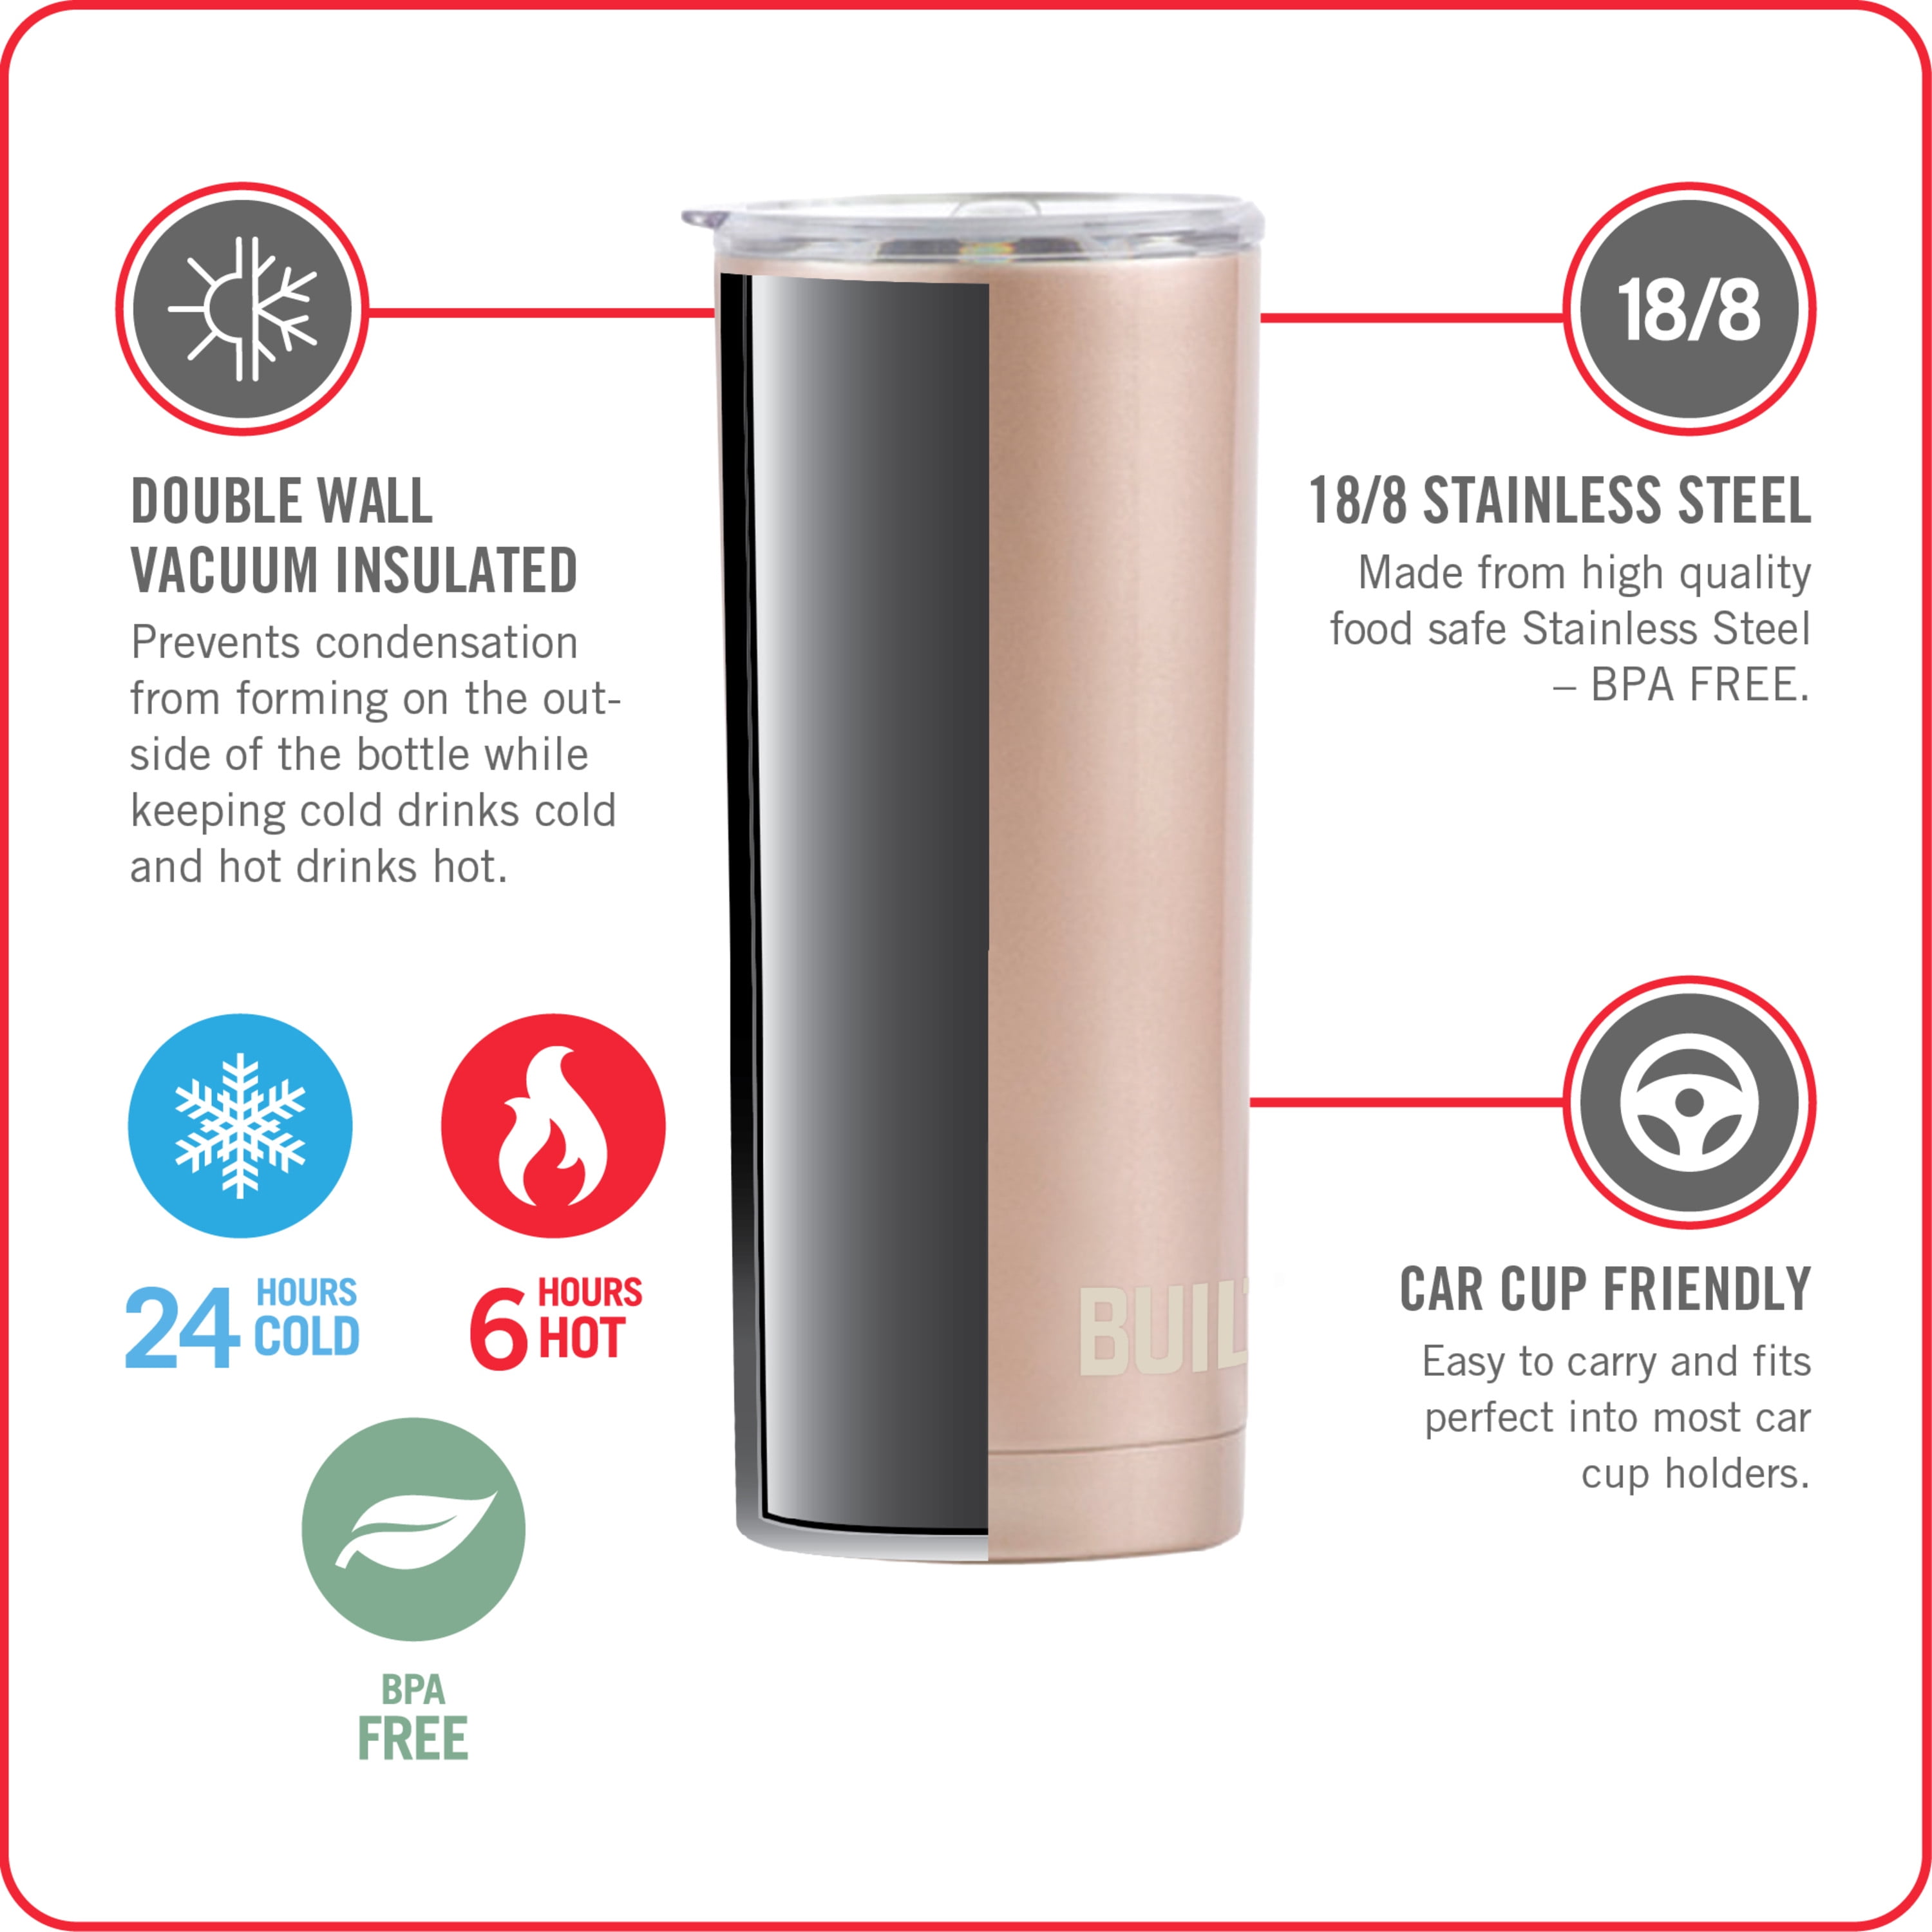 Pixiss Double Wall Tumbler Cups Bulk (8 pack) - 20 oz Stainless Steel Hot  and Cold Tumbler 8 Reusabl…See more Pixiss Double Wall Tumbler Cups Bulk (8